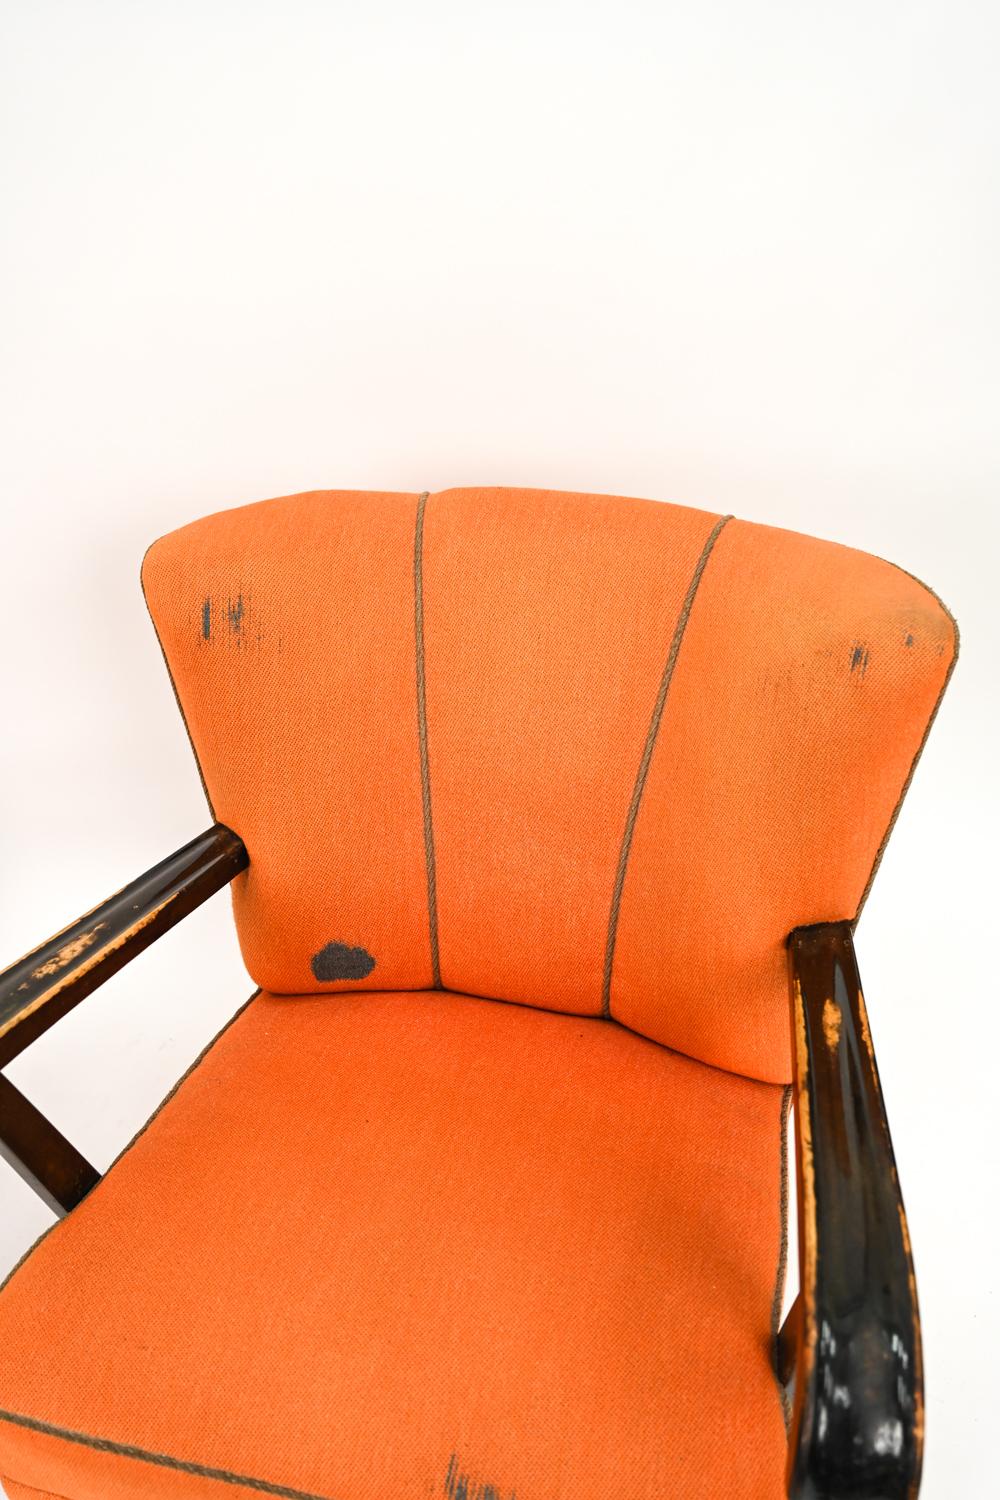 Mid-20th Century Pair of Slagelse Danish Channel-Back Lounge Chairs